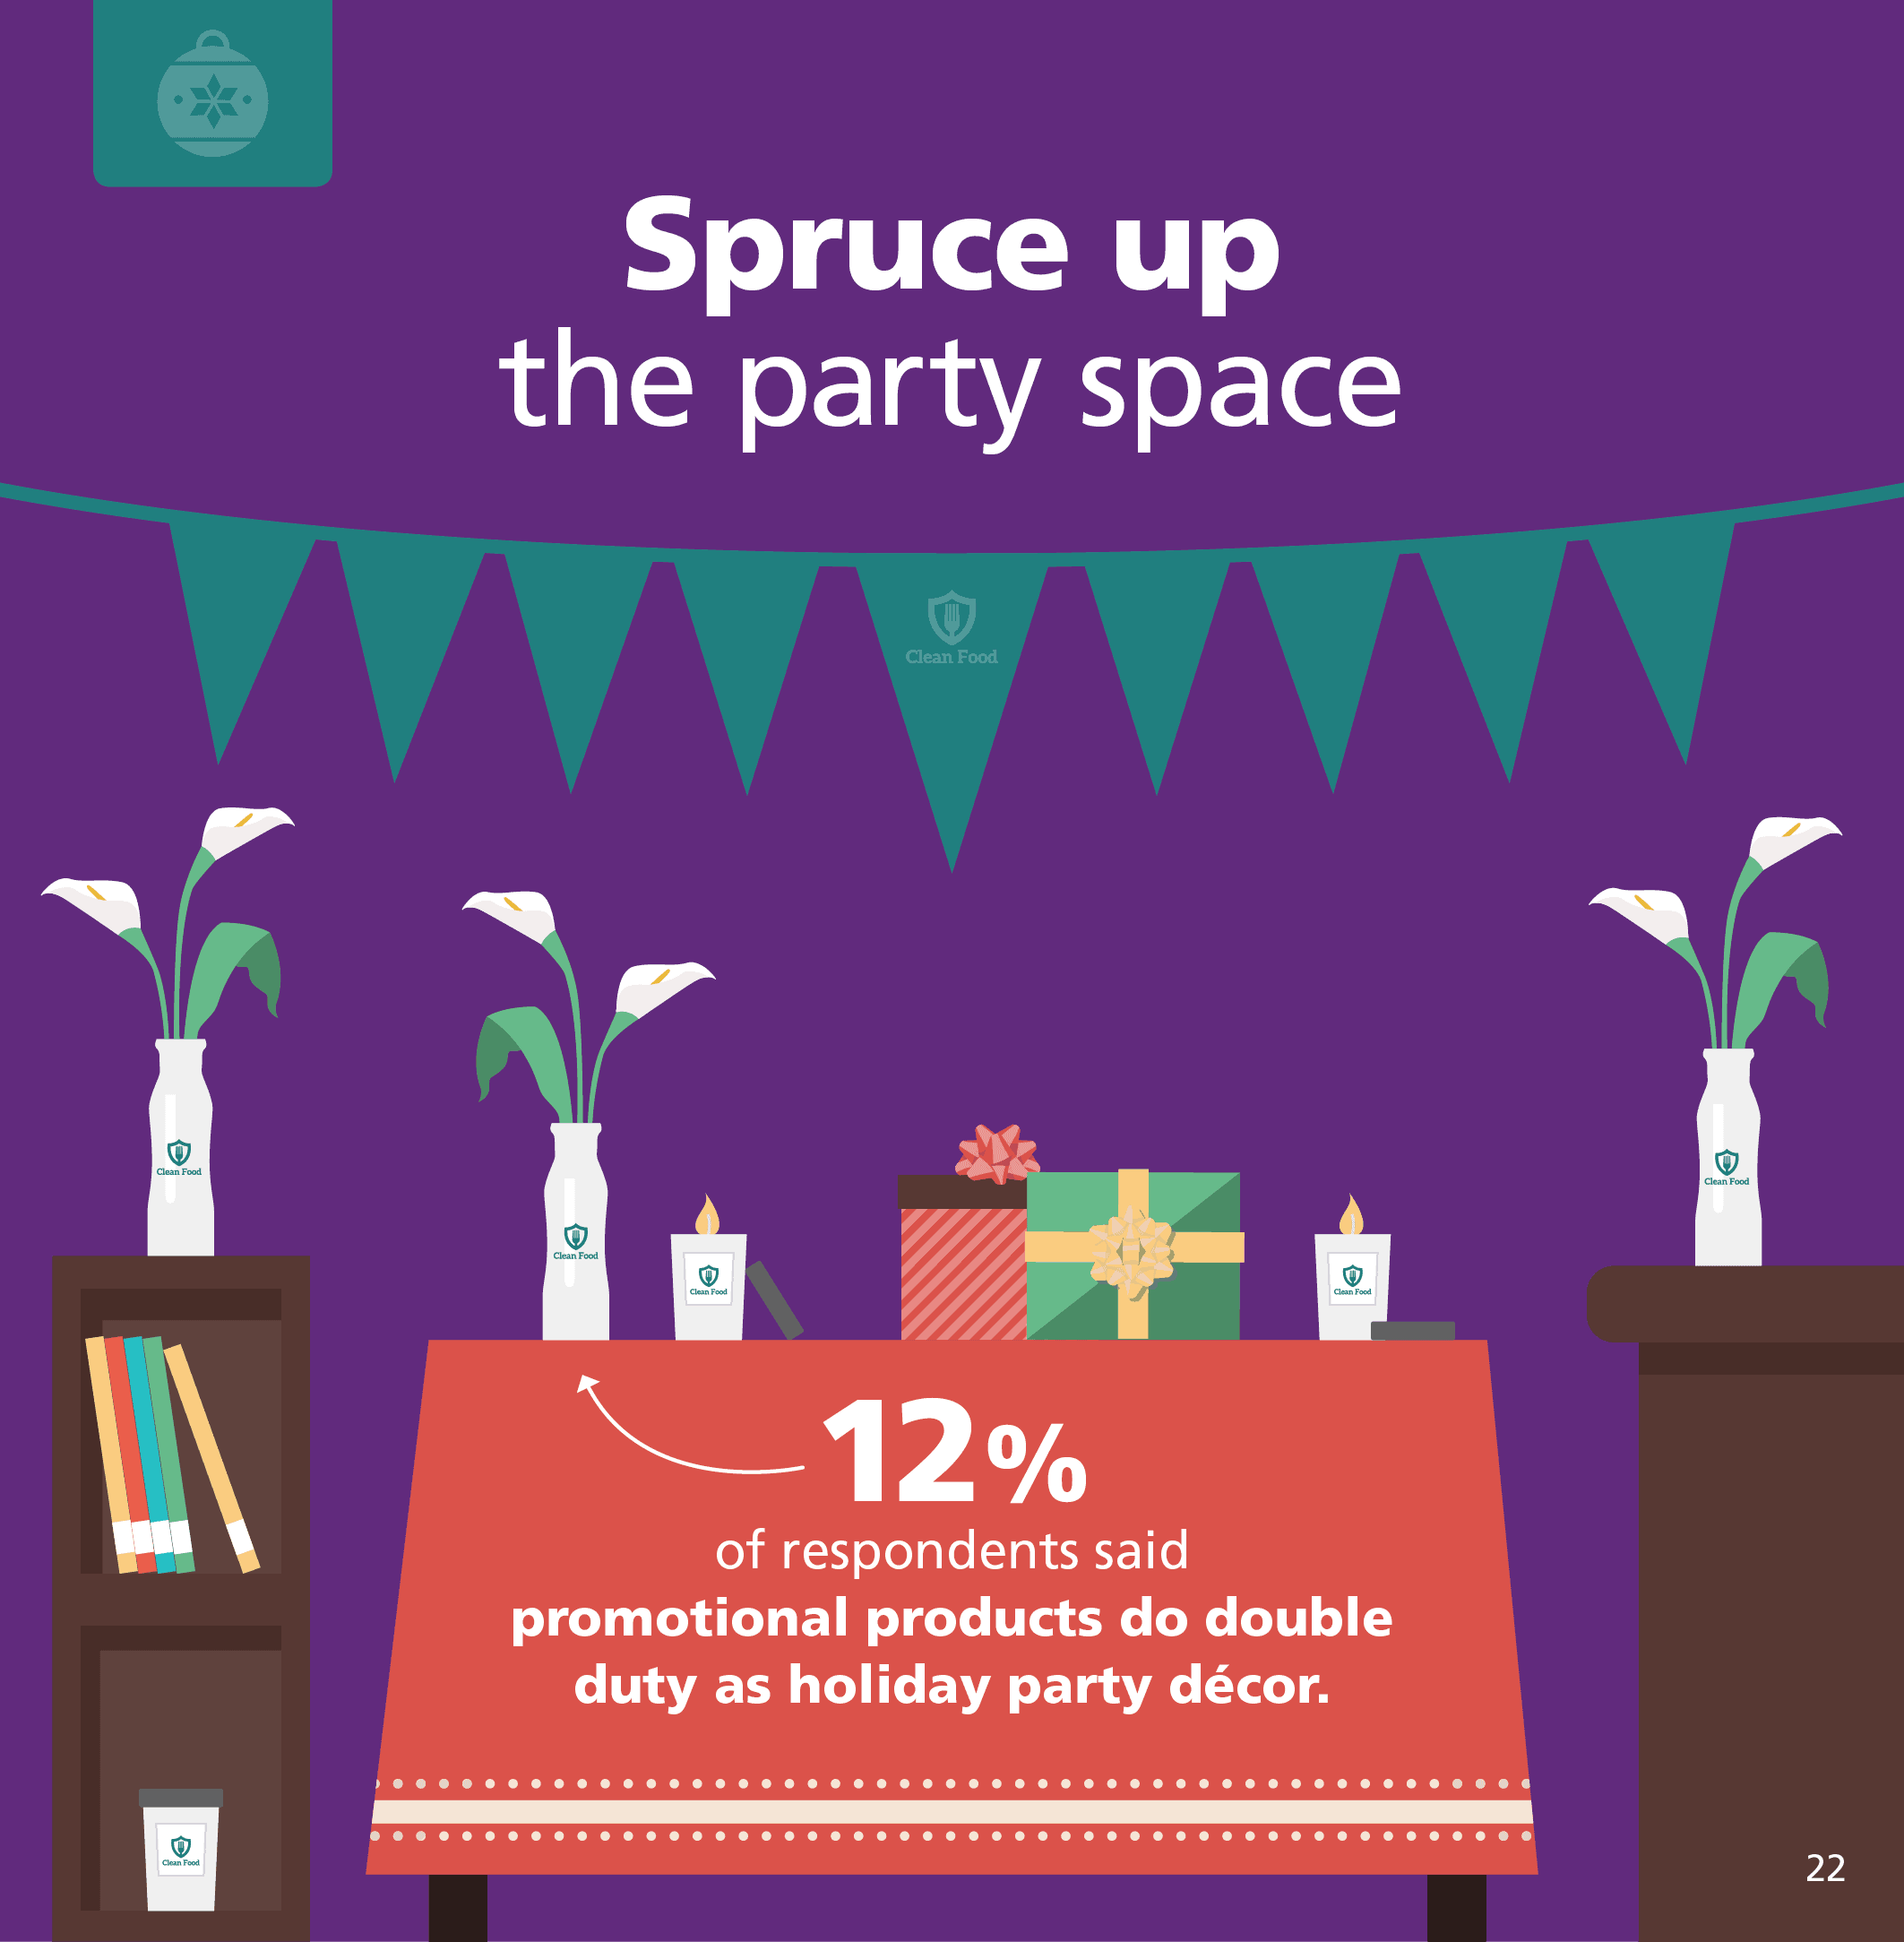 Spruce up the party space - 12% of respondents said promotional products do double duty as holiday party decor.